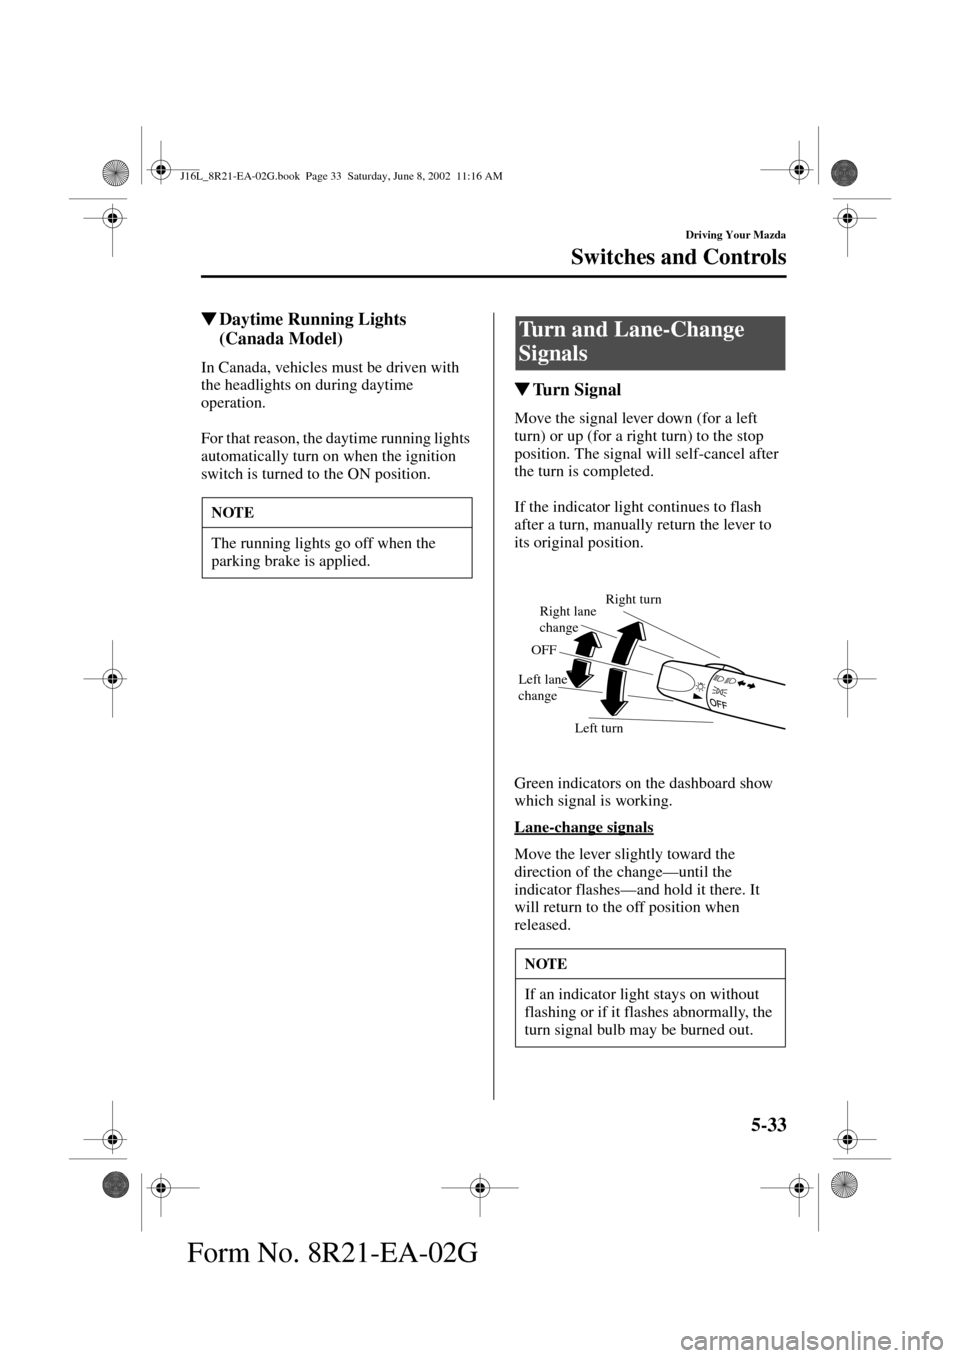 MAZDA MODEL MPV 2003  Owners Manual (in English) 5-33
Driving Your Mazda
Switches and Controls
Form No. 8R21-EA-02G
Daytime Running Lights 
(Canada Model)
In Canada, vehicles must be driven with 
the headlights on during daytime 
operation.
For tha